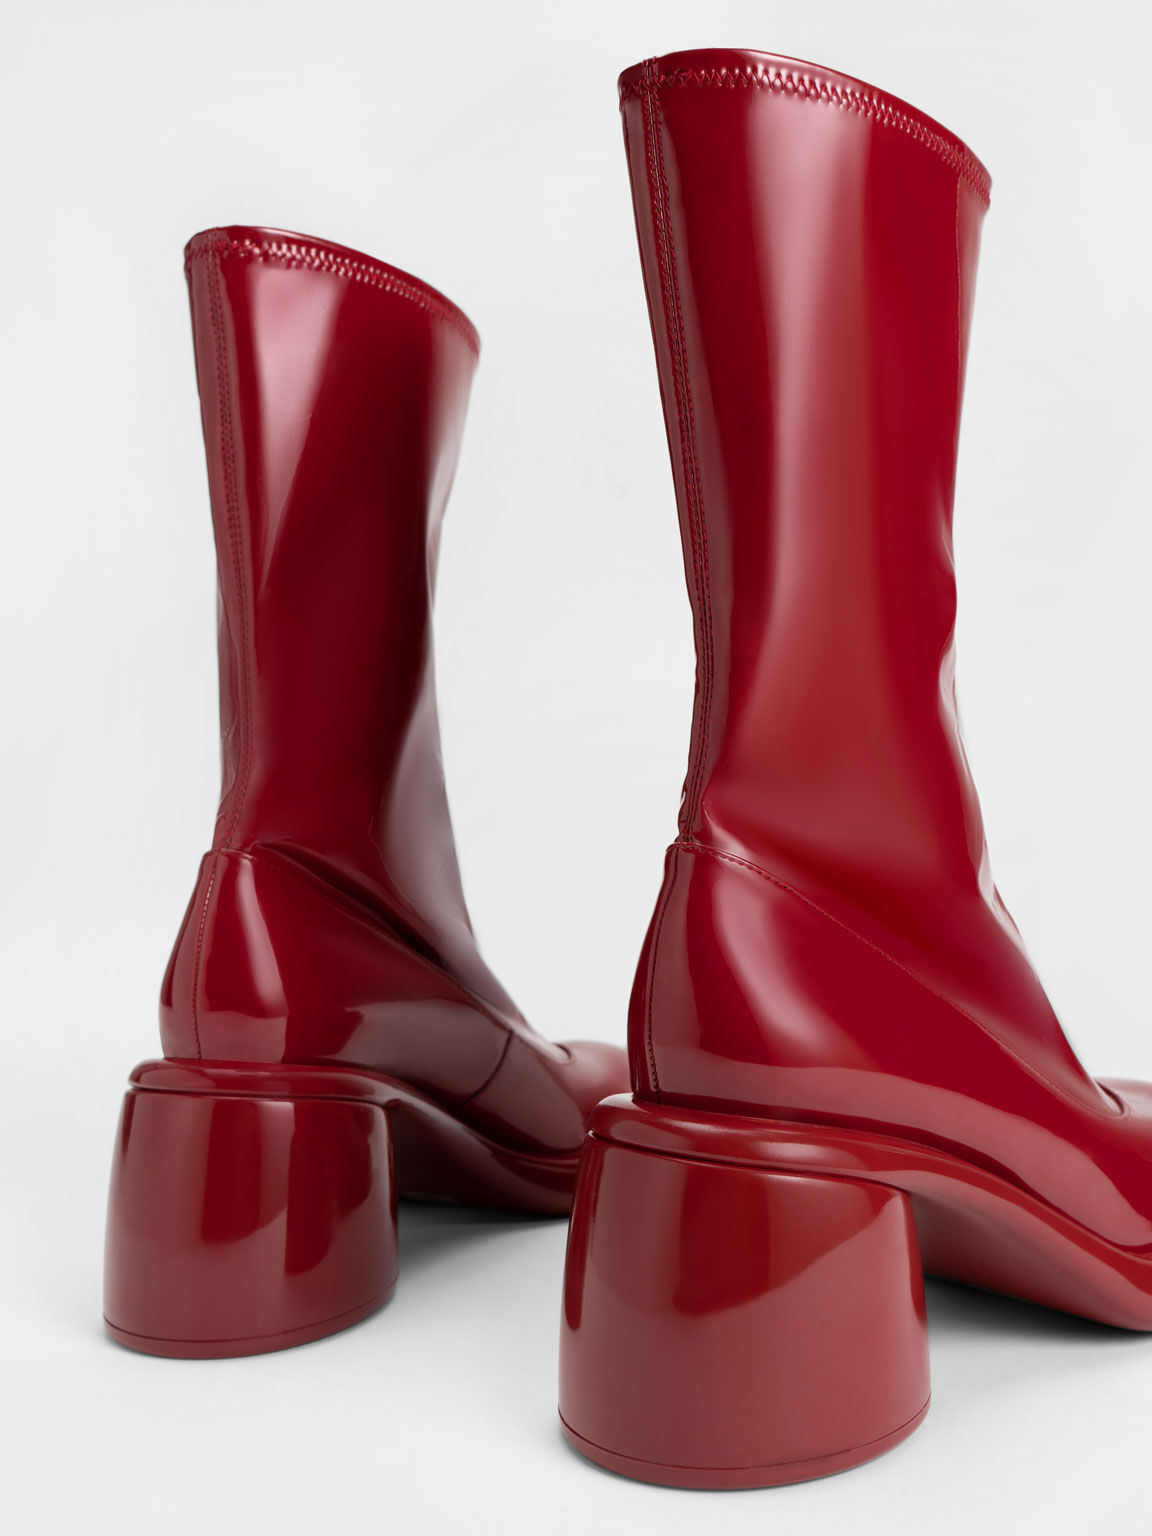 Lula Patent Chunky Heel Calf Boots, Red, hi-res